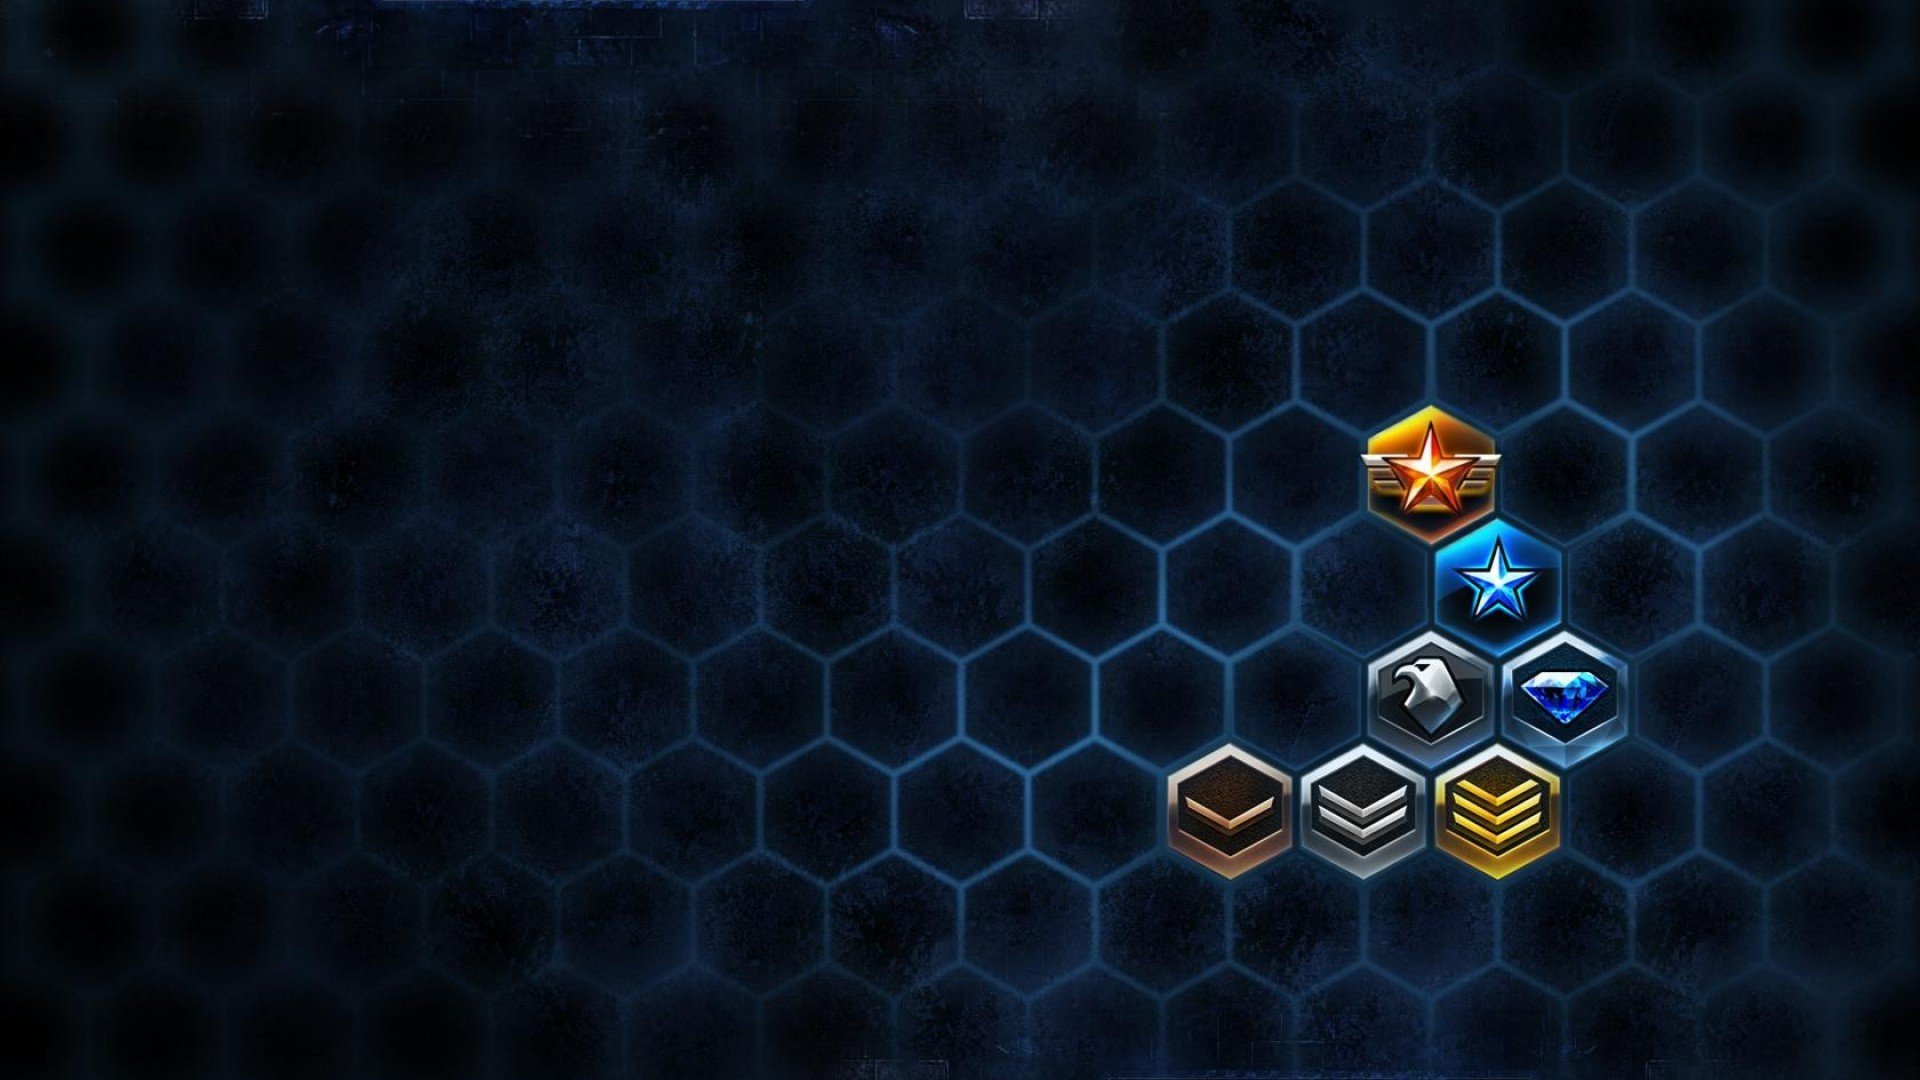 Hd Blue And Gold Background - Starcraft League , HD Wallpaper & Backgrounds